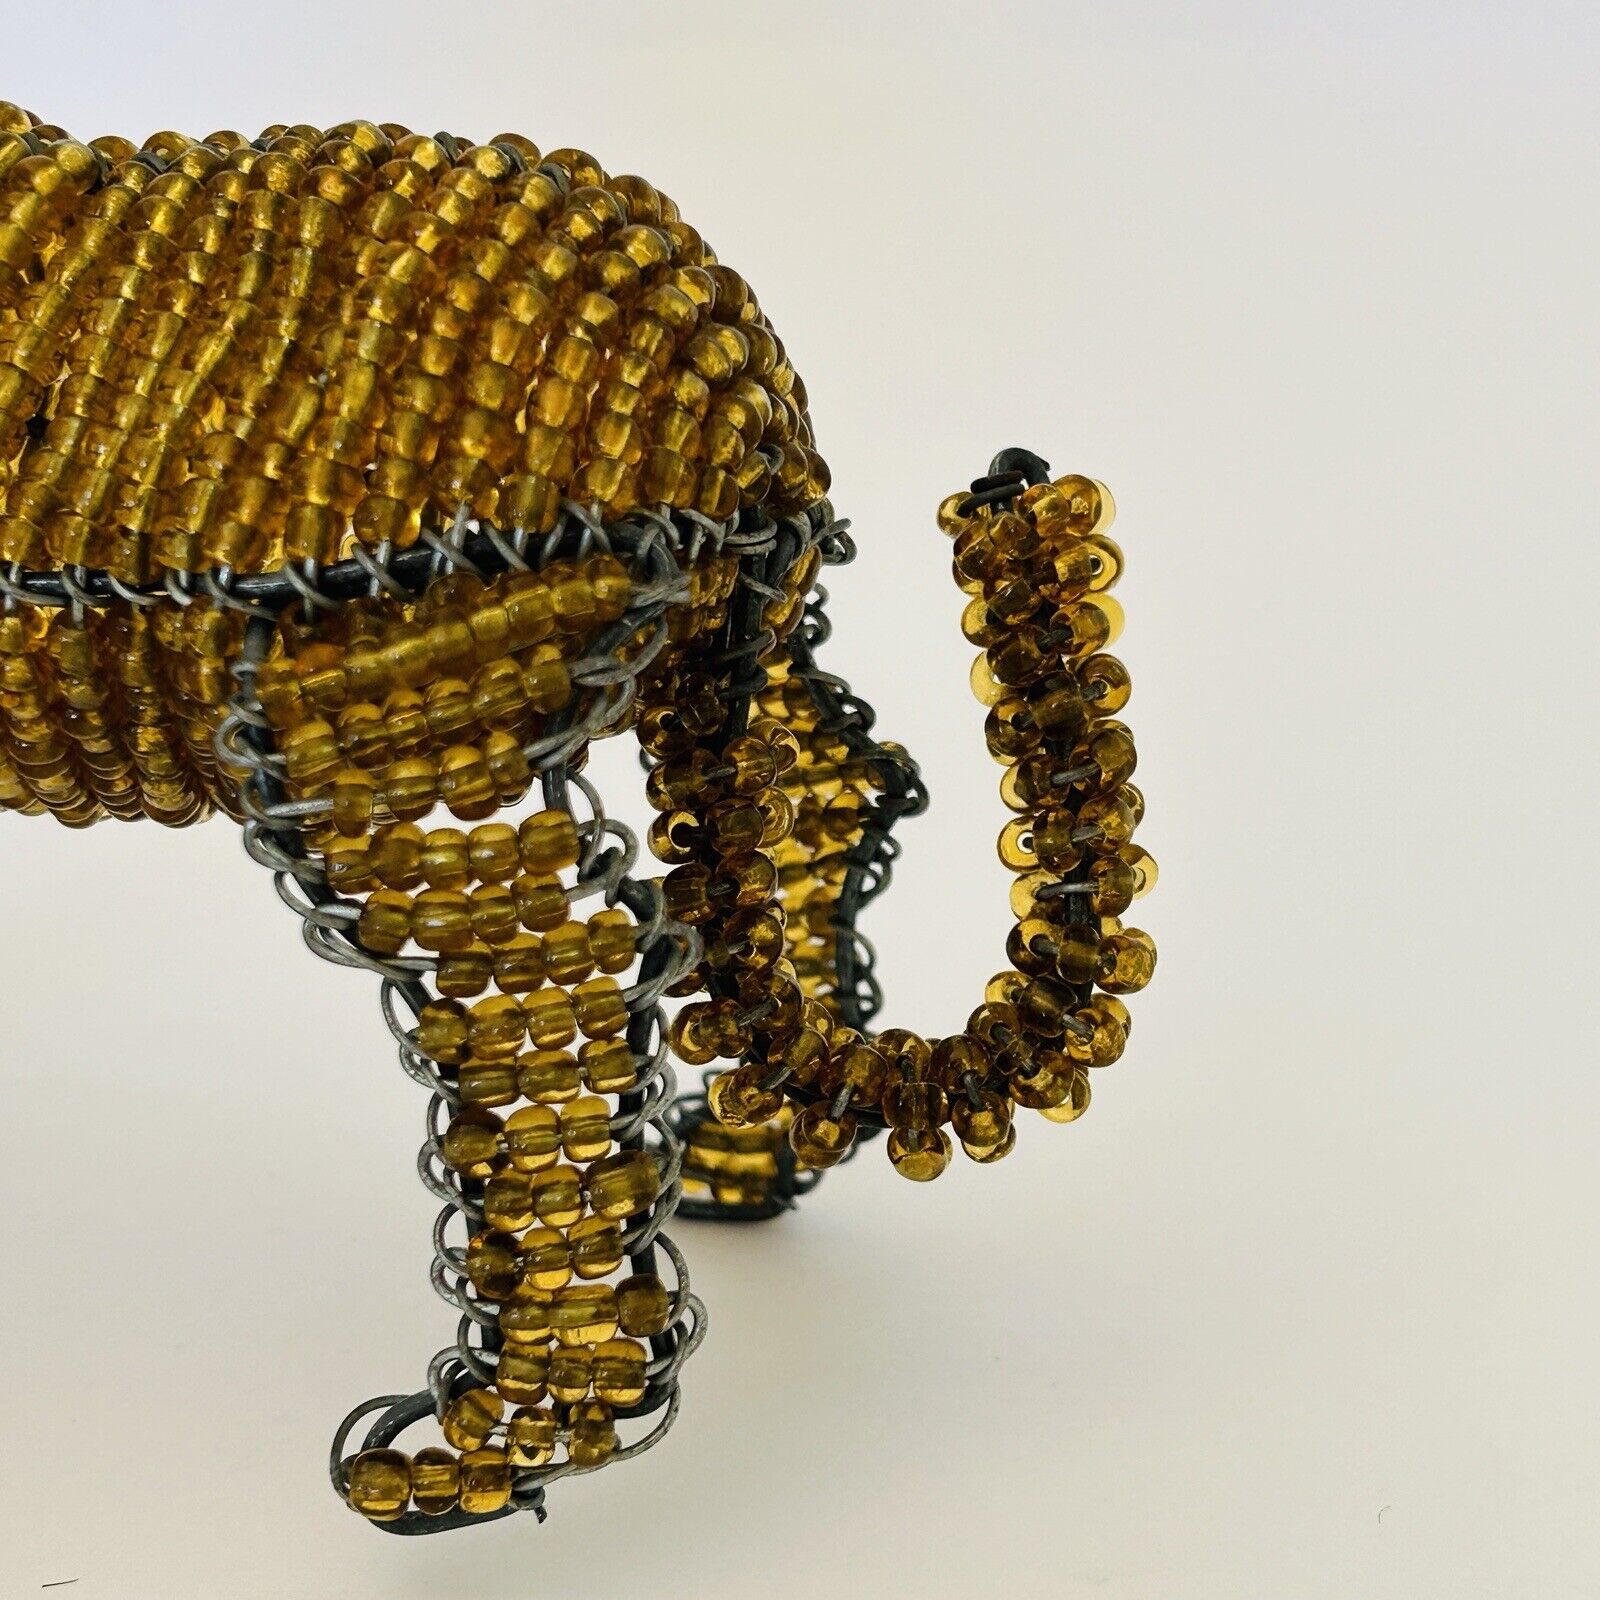 Vintage Retro Lion Glass Bead and Wire Sculpture Figurine African Jungle Unique - Flexi Africa - Flexi Africa offers Free Delivery Worldwide - Vibrant African traditional clothing showcasing bold prints and intricate designs